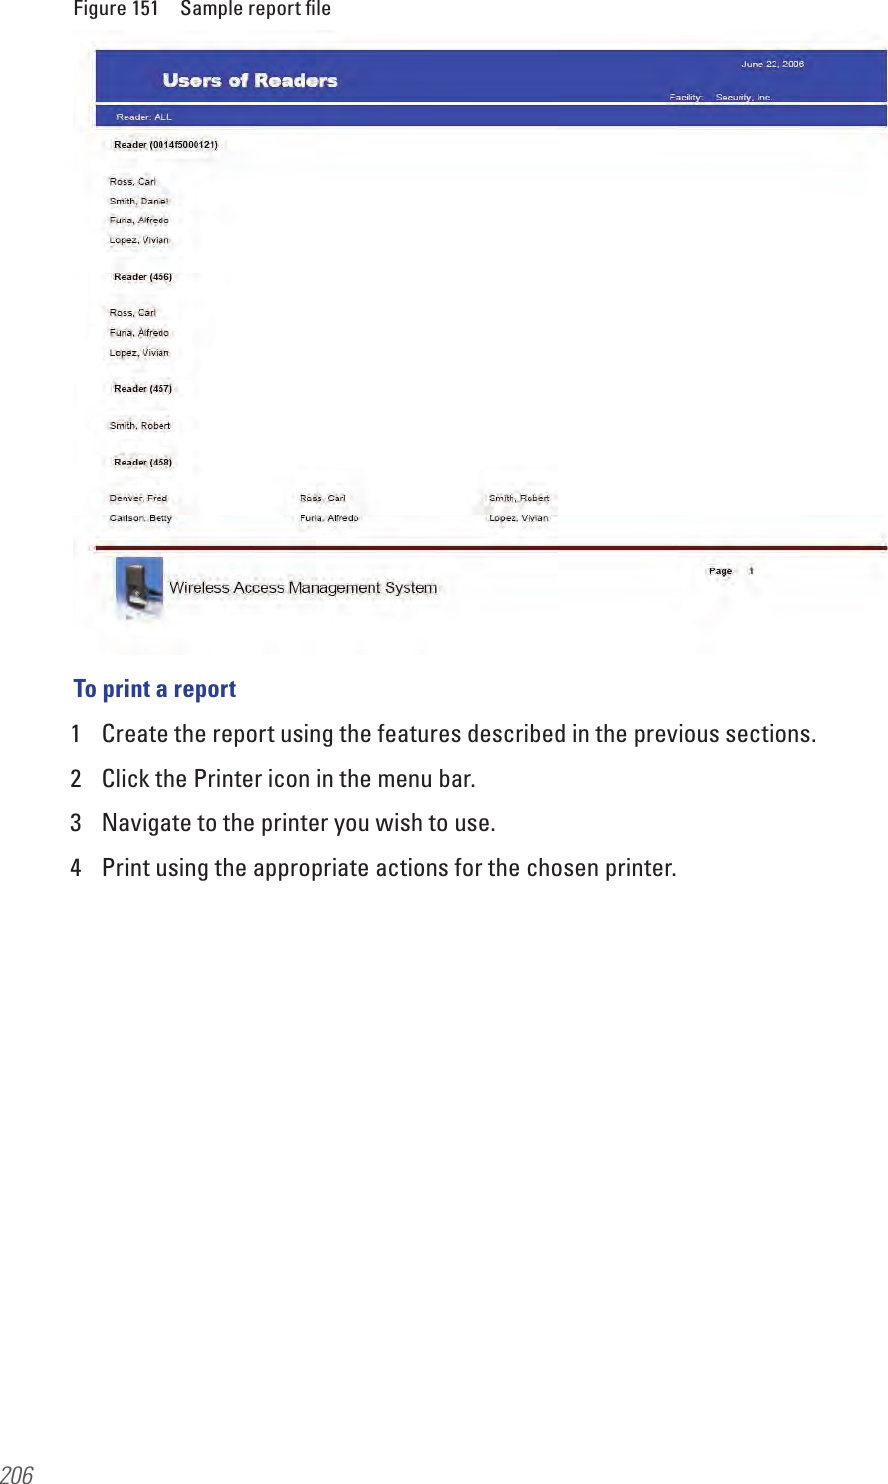 206Figure 151  Sample report ﬁleTo print a report1  Create the report using the features described in the previous sections.2  Click the Printer icon in the menu bar.3  Navigate to the printer you wish to use.4  Print using the appropriate actions for the chosen printer.